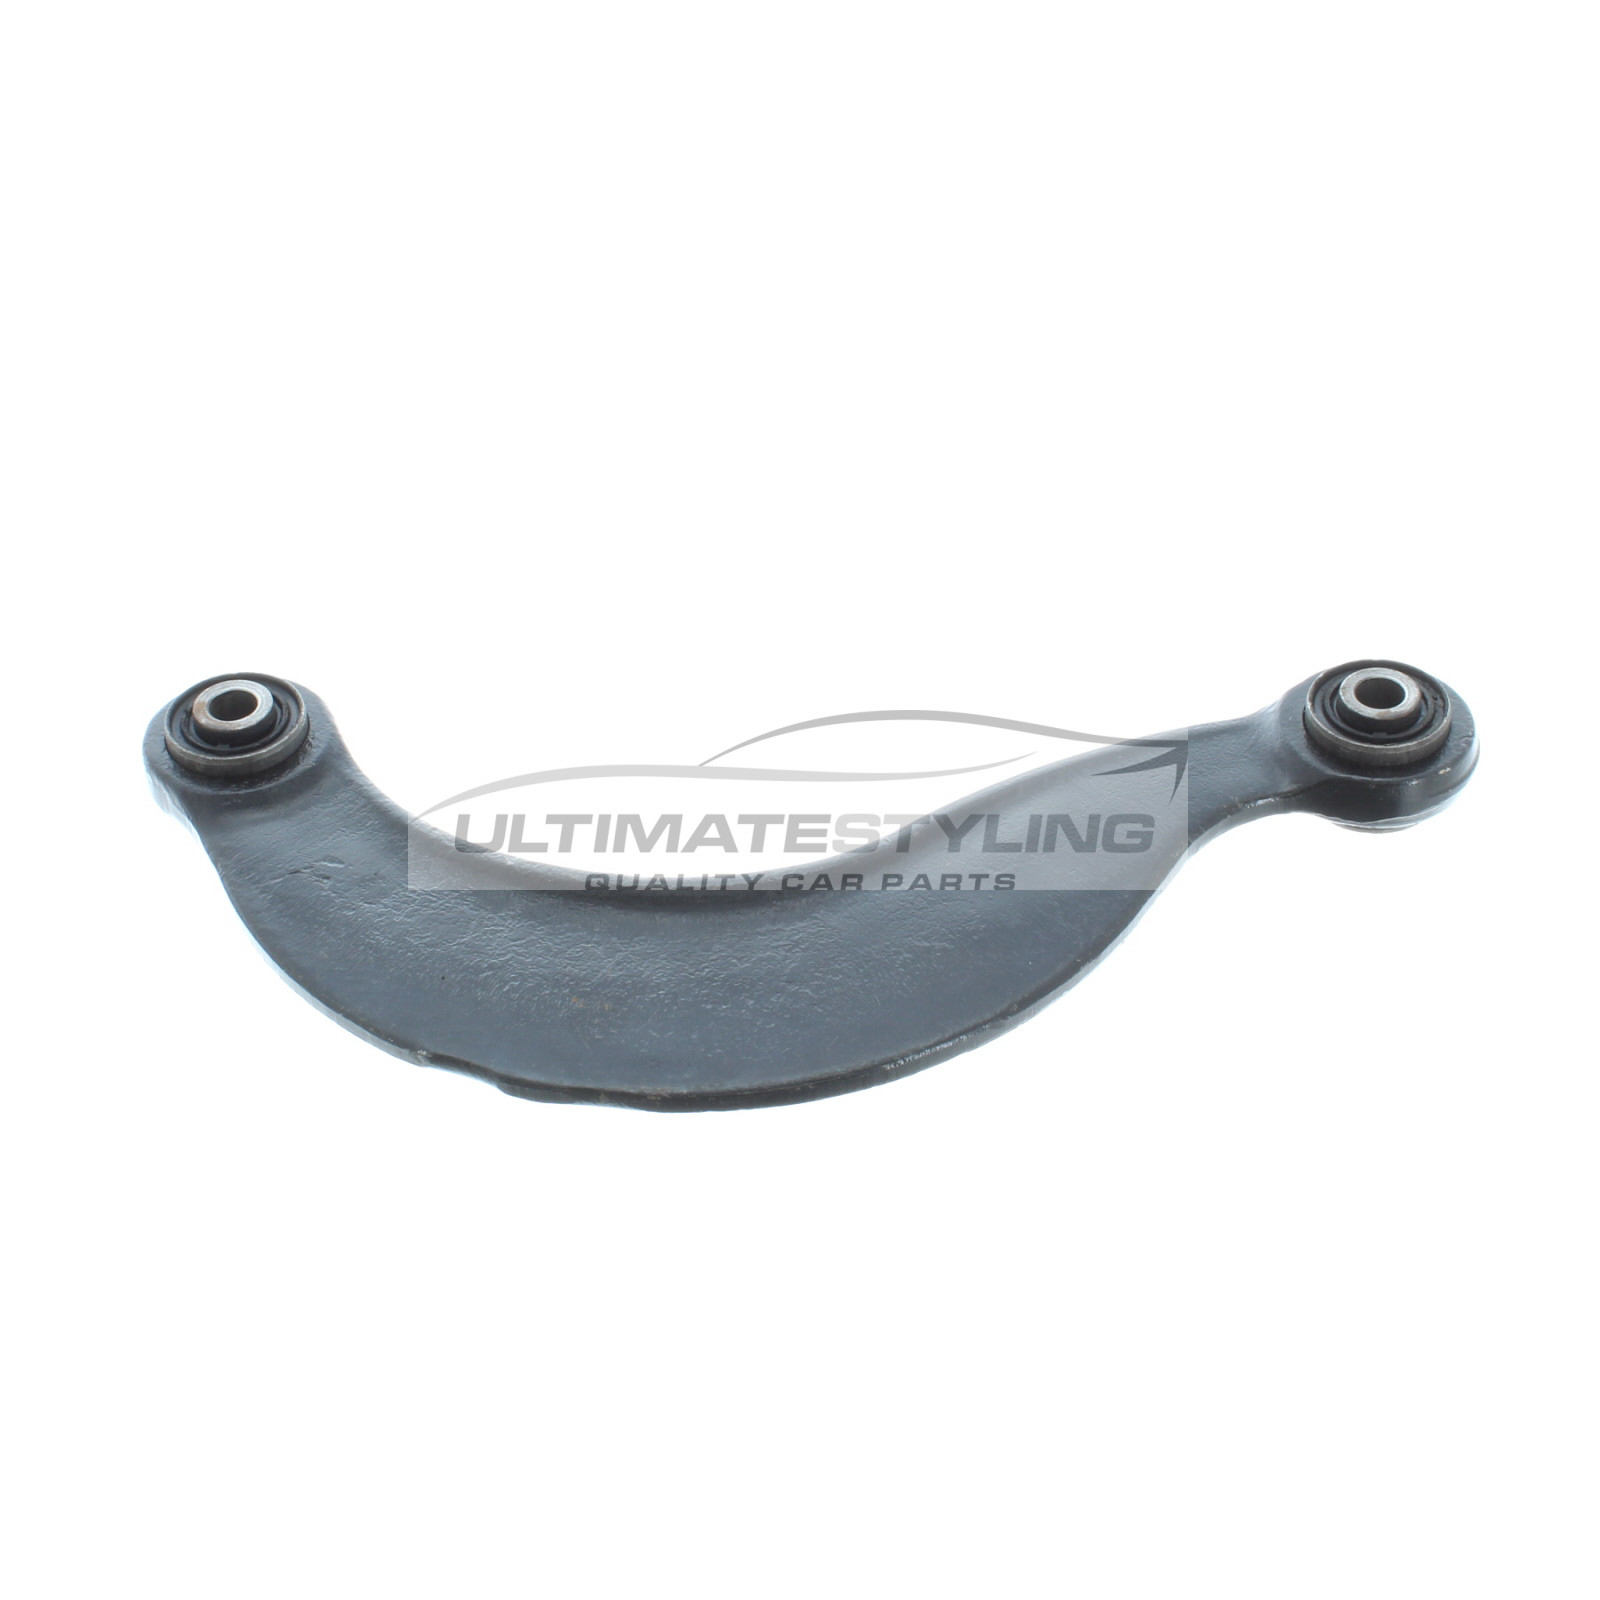 Ford C-MAX 2007-2009, Ford Focus 1998-2011, Mazda 3 2004-2011, Mazda 5 2005-2013, Volvo C30 2006-2012, Volvo S40 2004-2012, Volvo V50 2004-2012 Rear Upper Suspension Arm (Steel) Excluding Ball Joint and Rear Bush Universal (LH or RH)